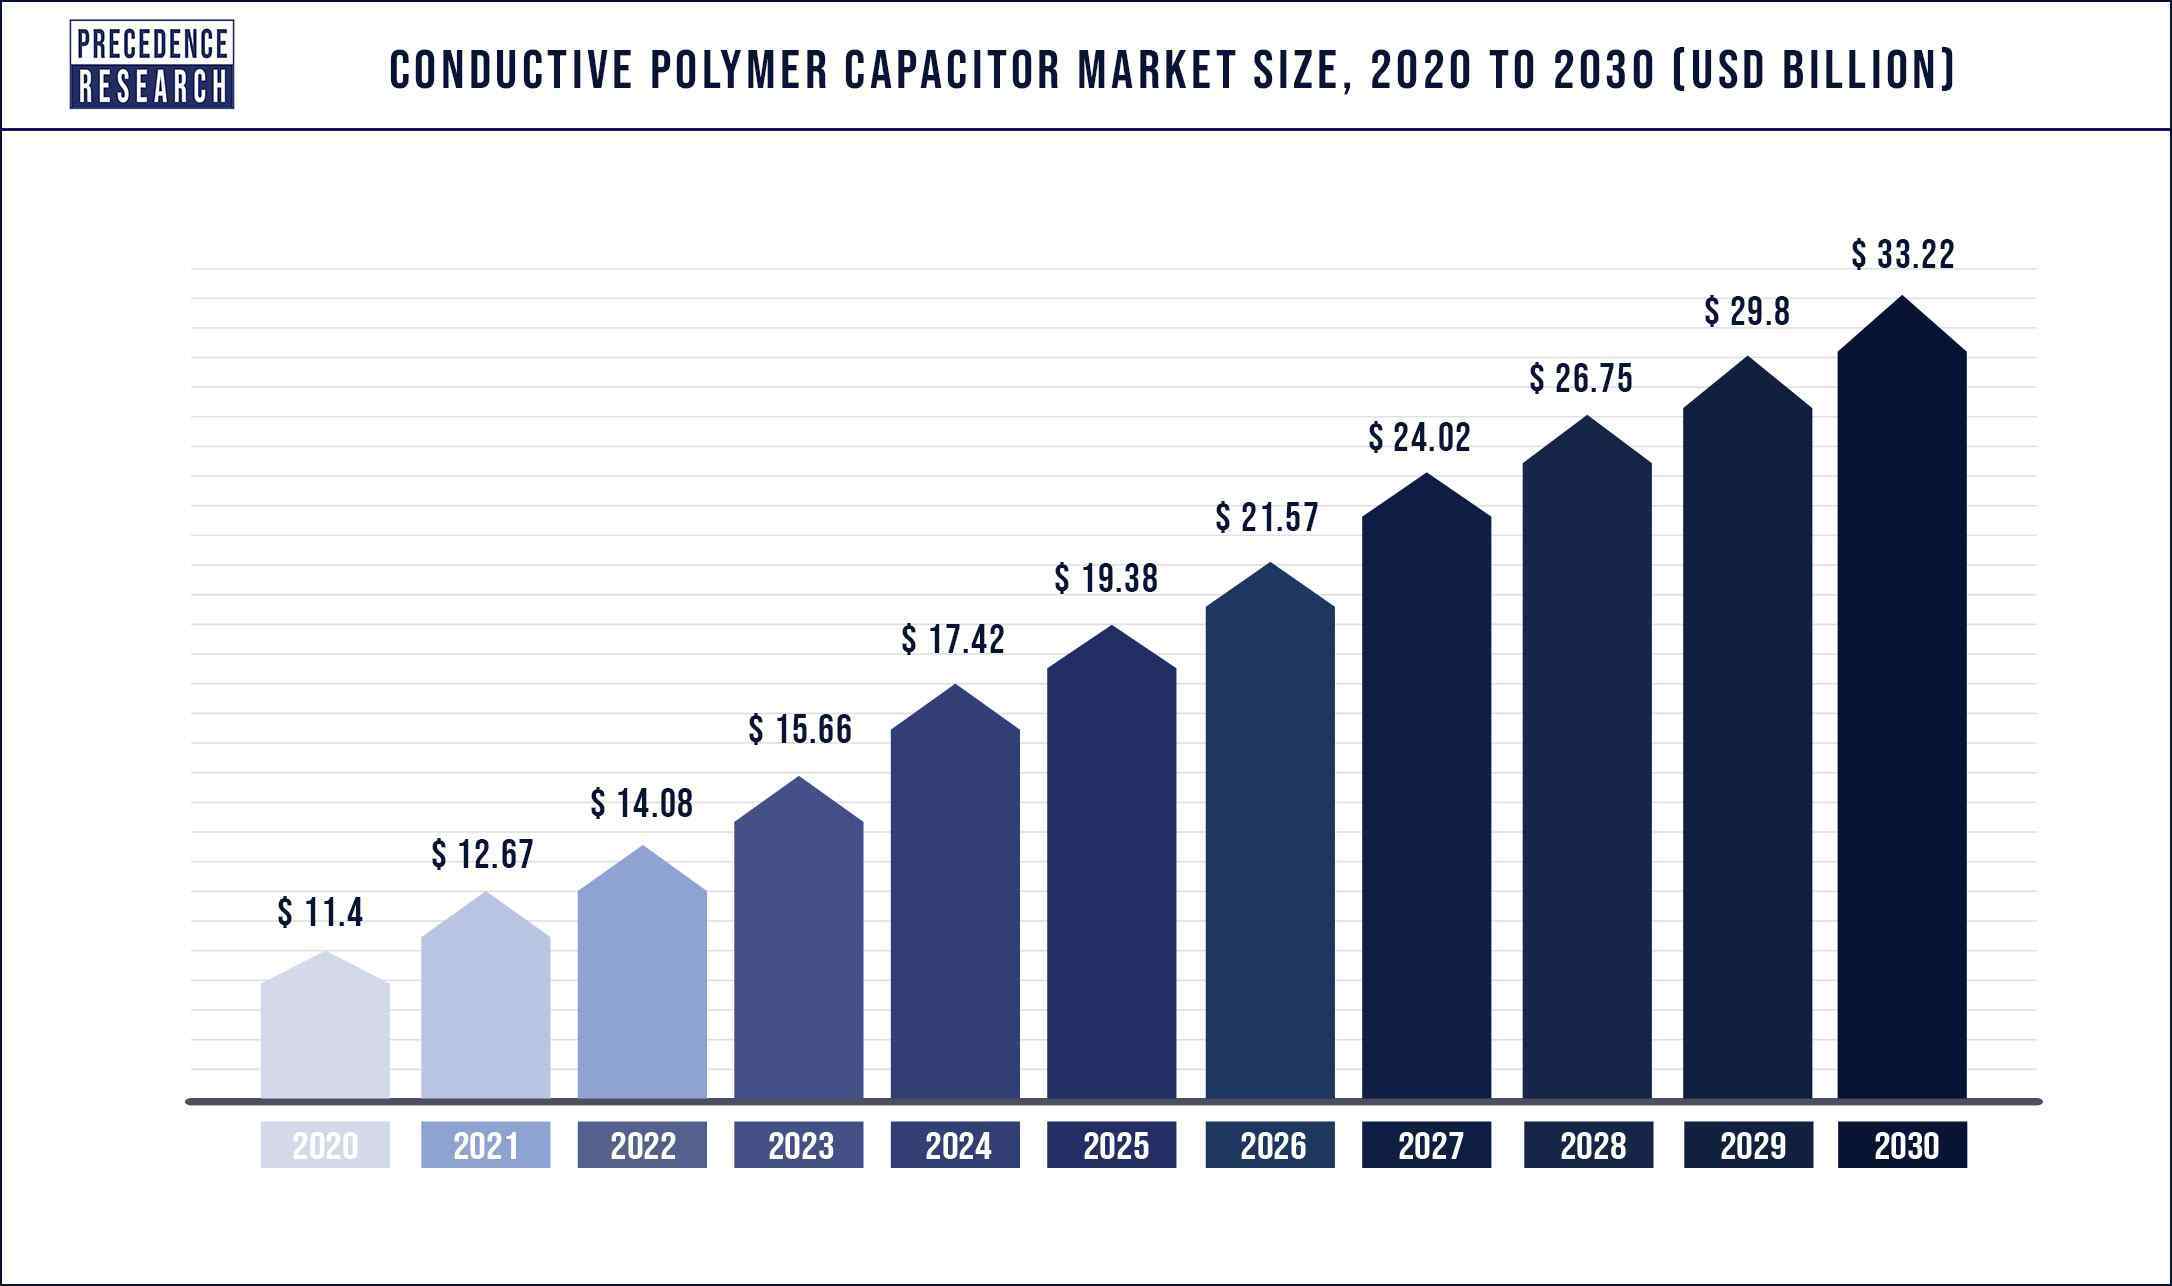 Conductive Polymer Capacitor Market Size 2020-2030